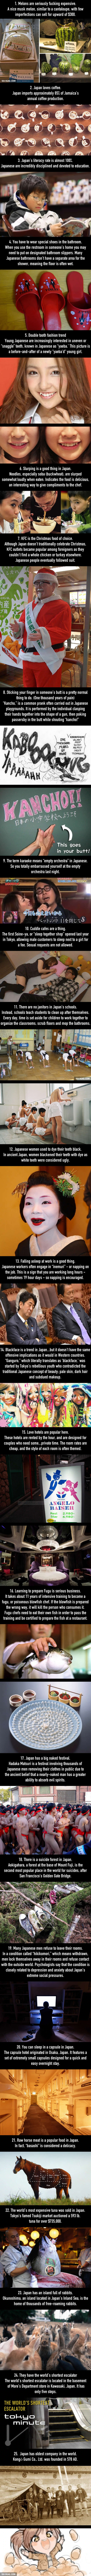 25 Weird Things About Japan That'll Make You Say What